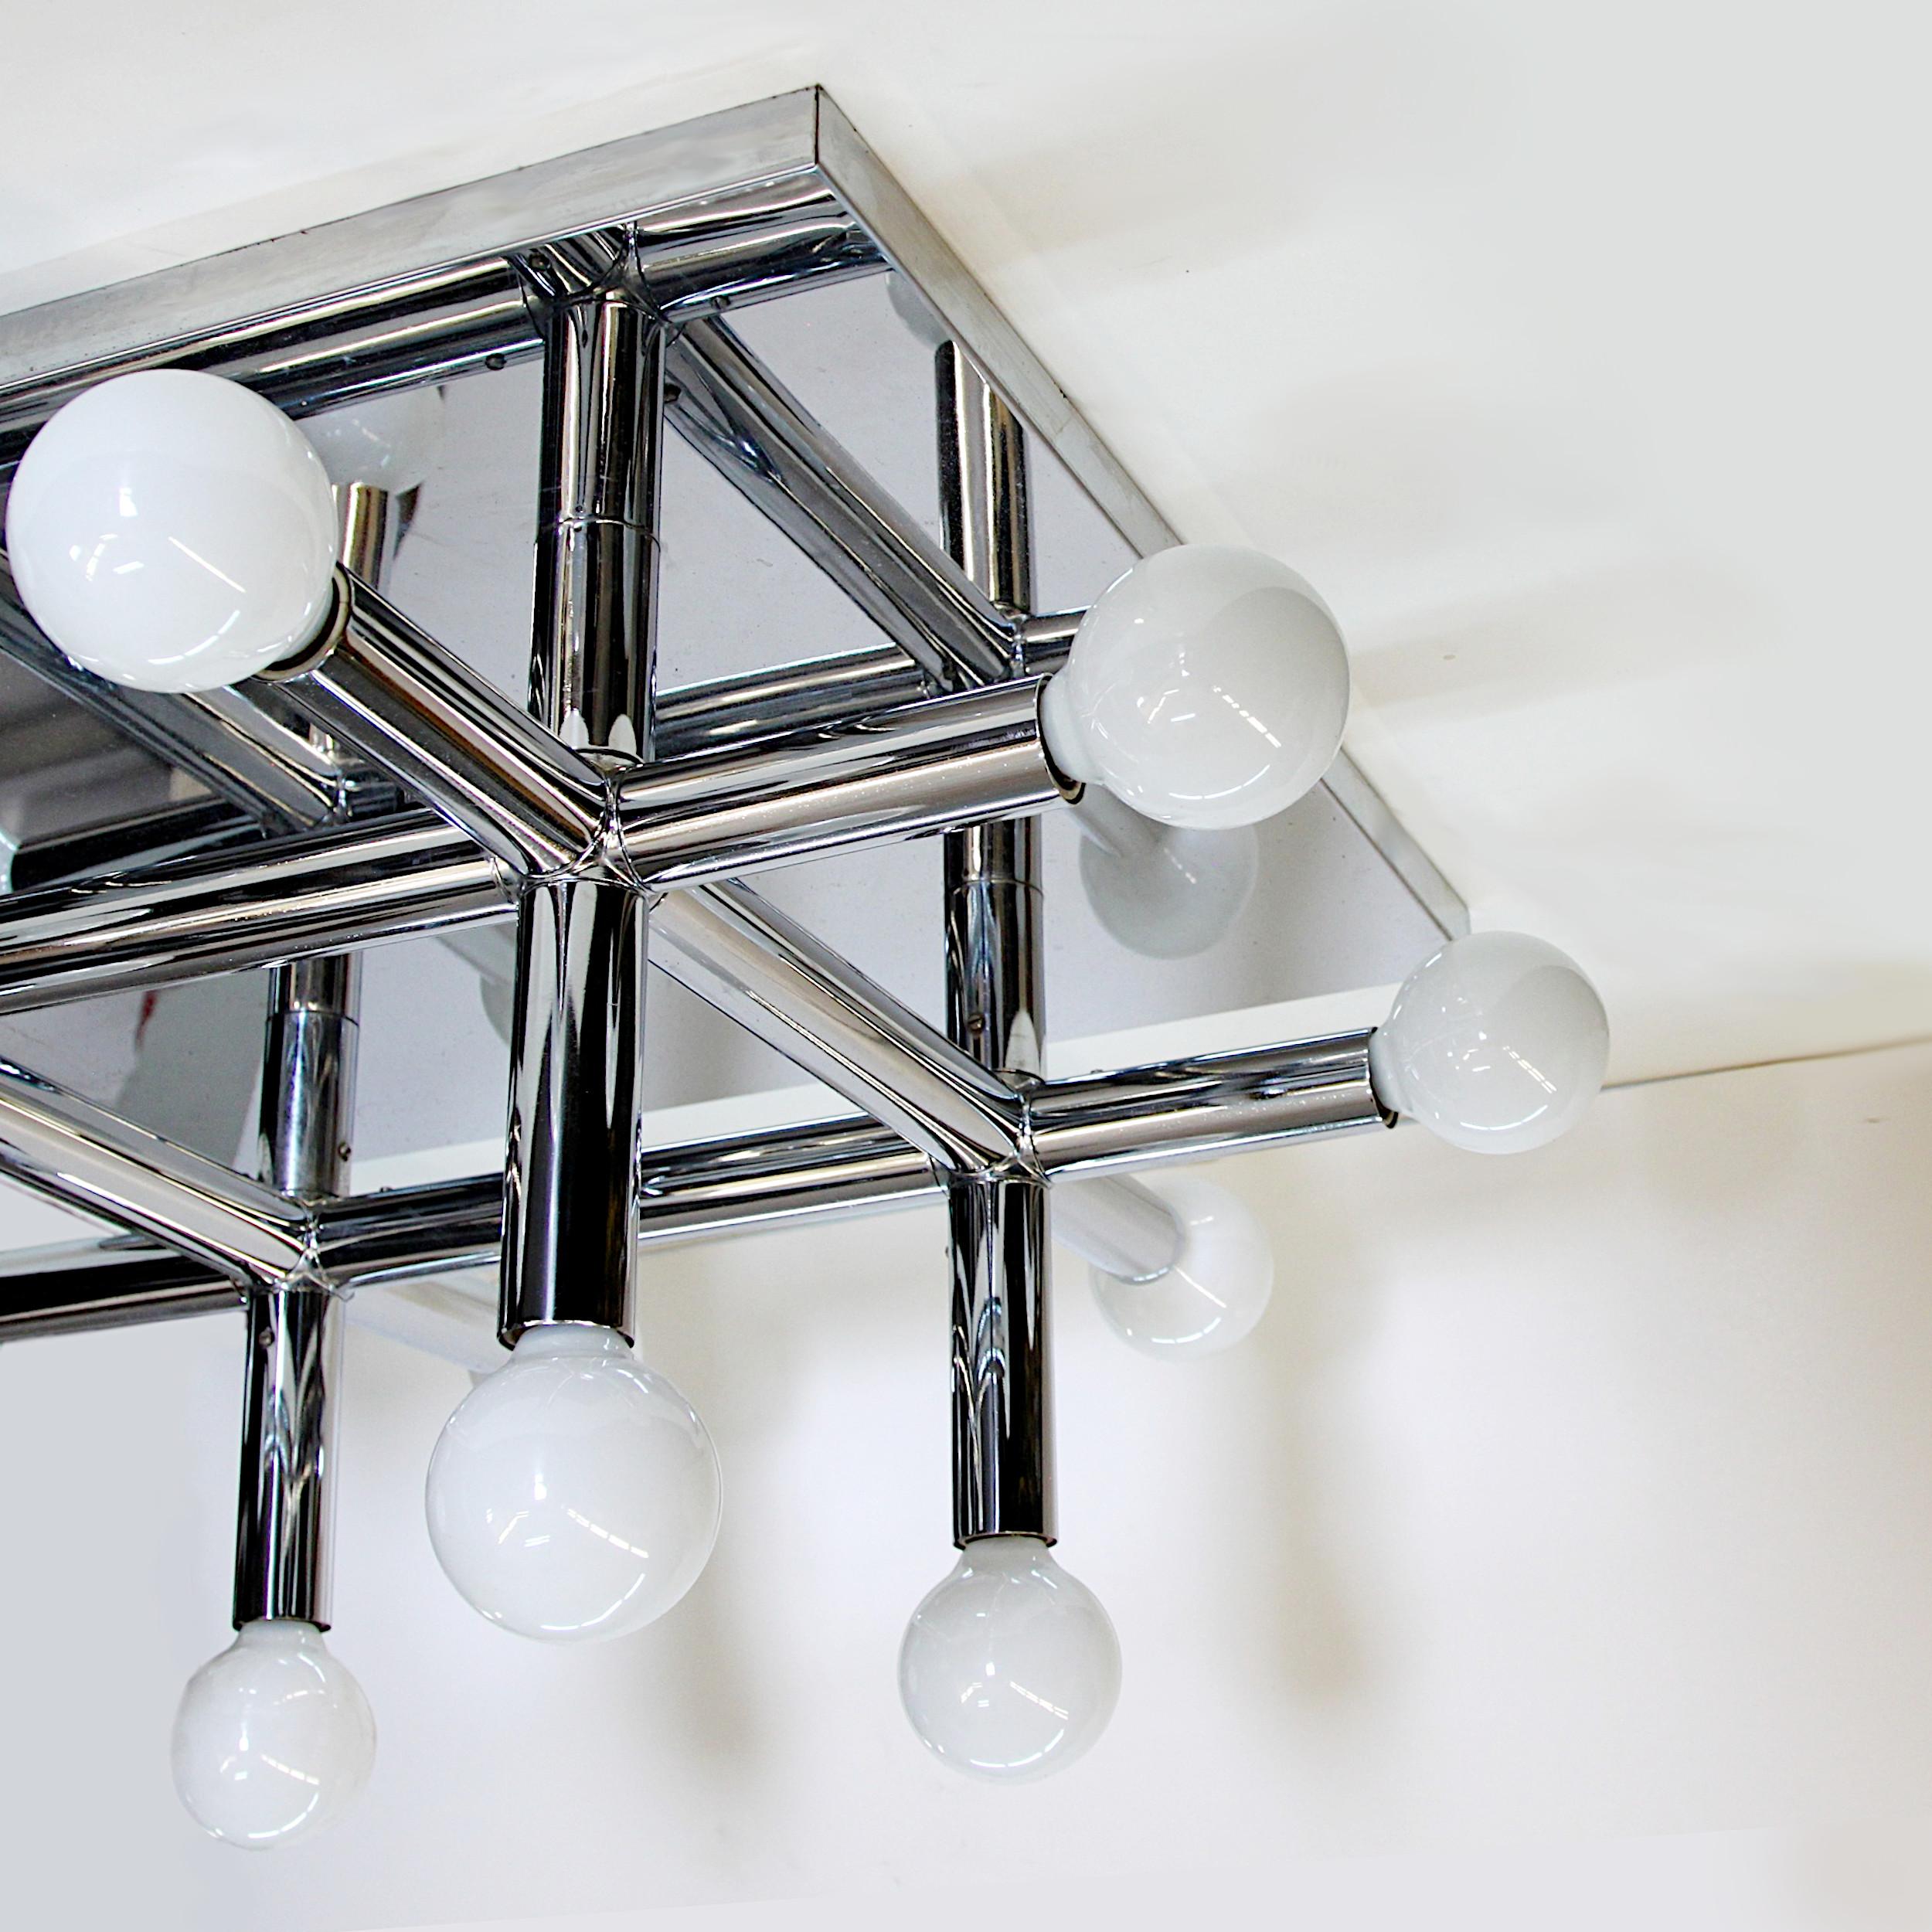 North American Mid-Century Modern Chrome Tic Tac Toe Chandelier Light Fixture by Lightolier